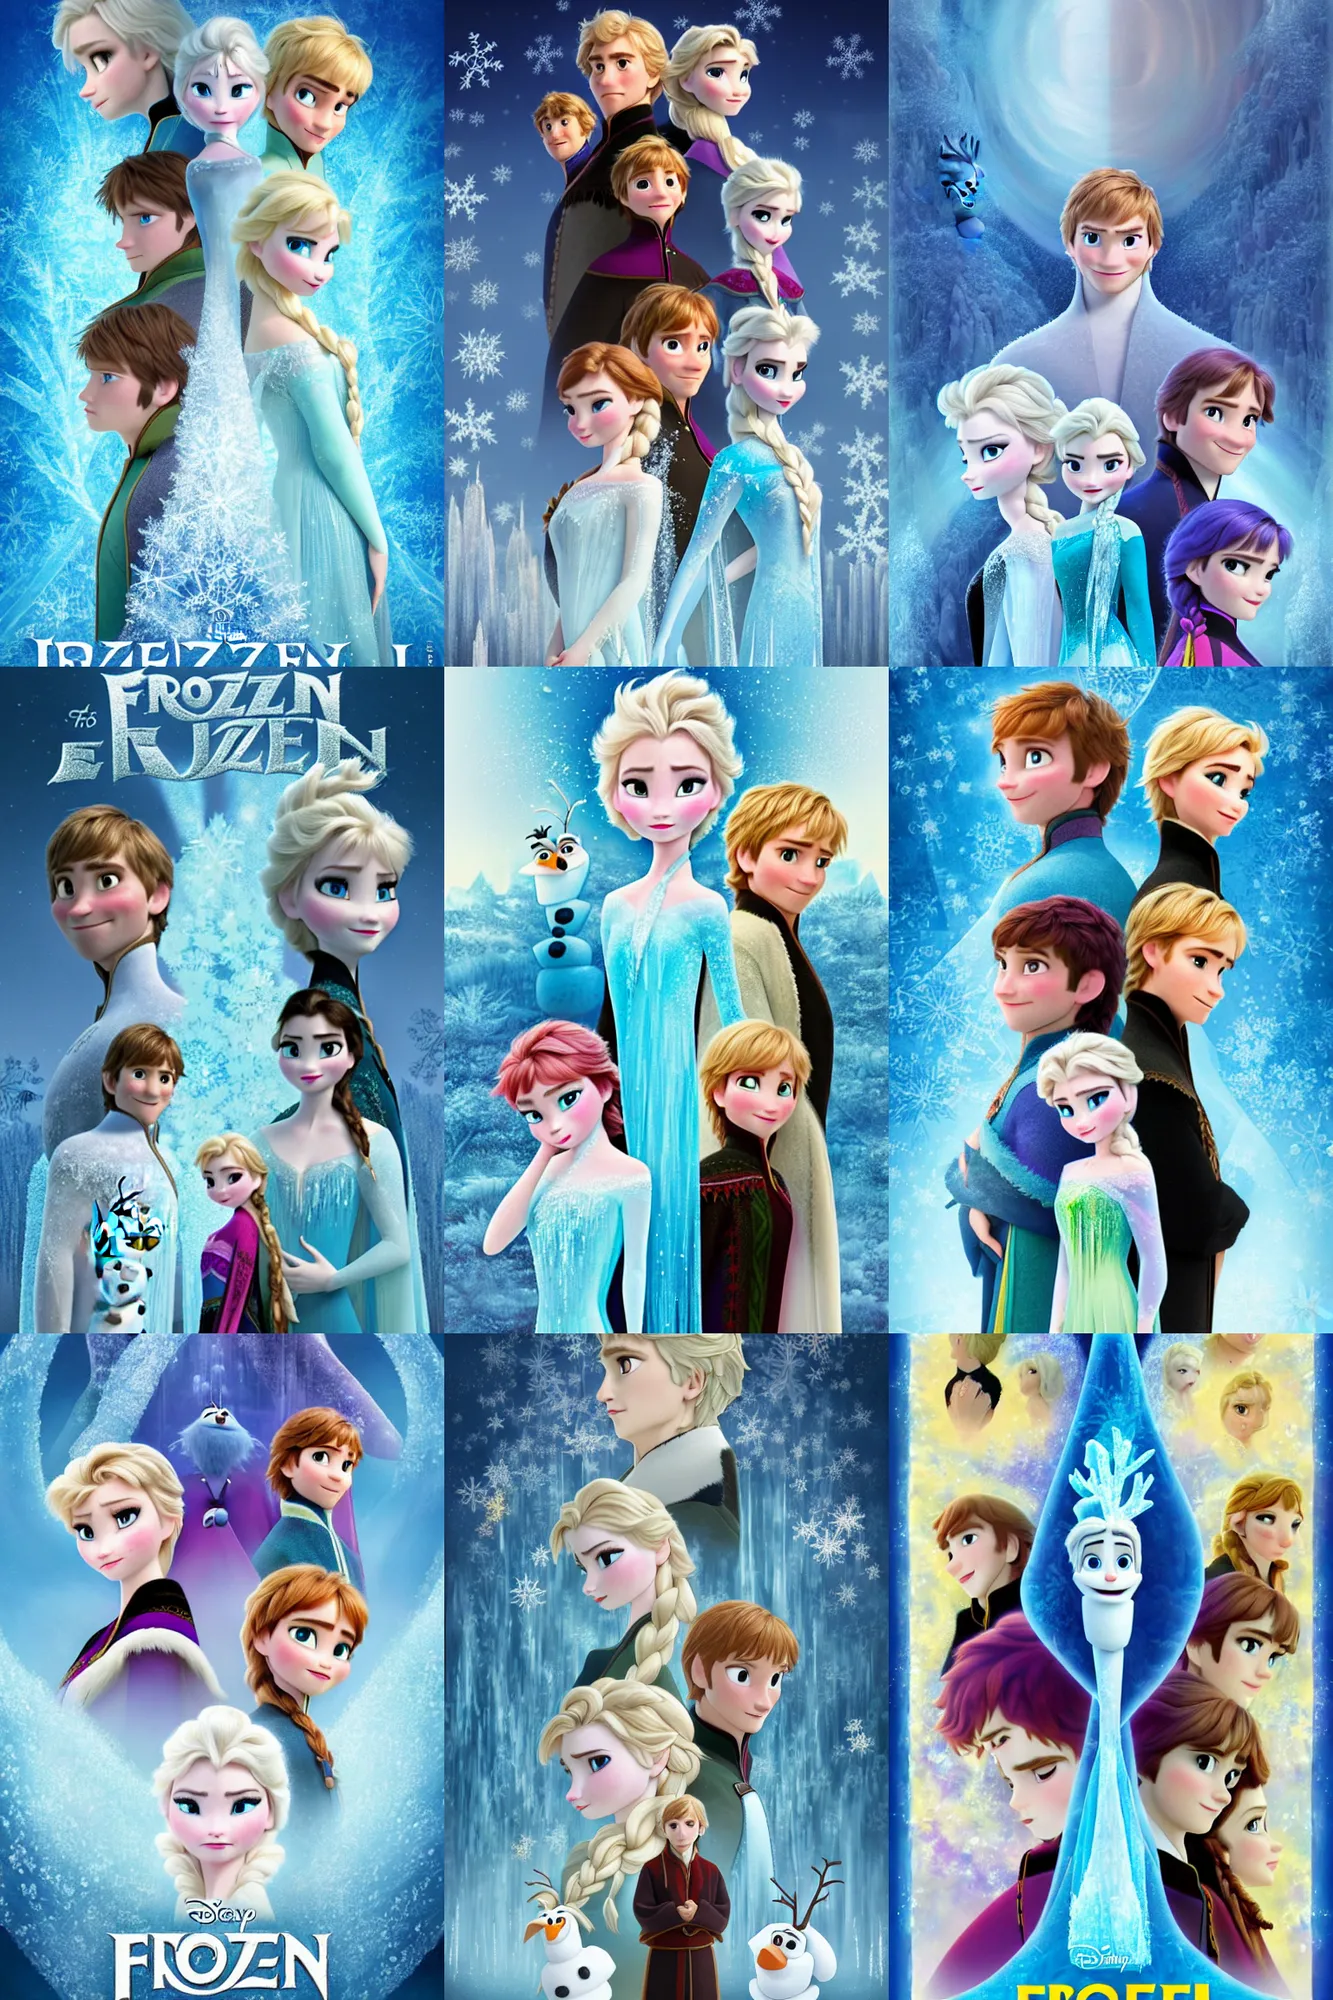 FROZEN III THE PROPHECY ELSA 13x19 GLOSSY PHOTO MOVIE POSTER